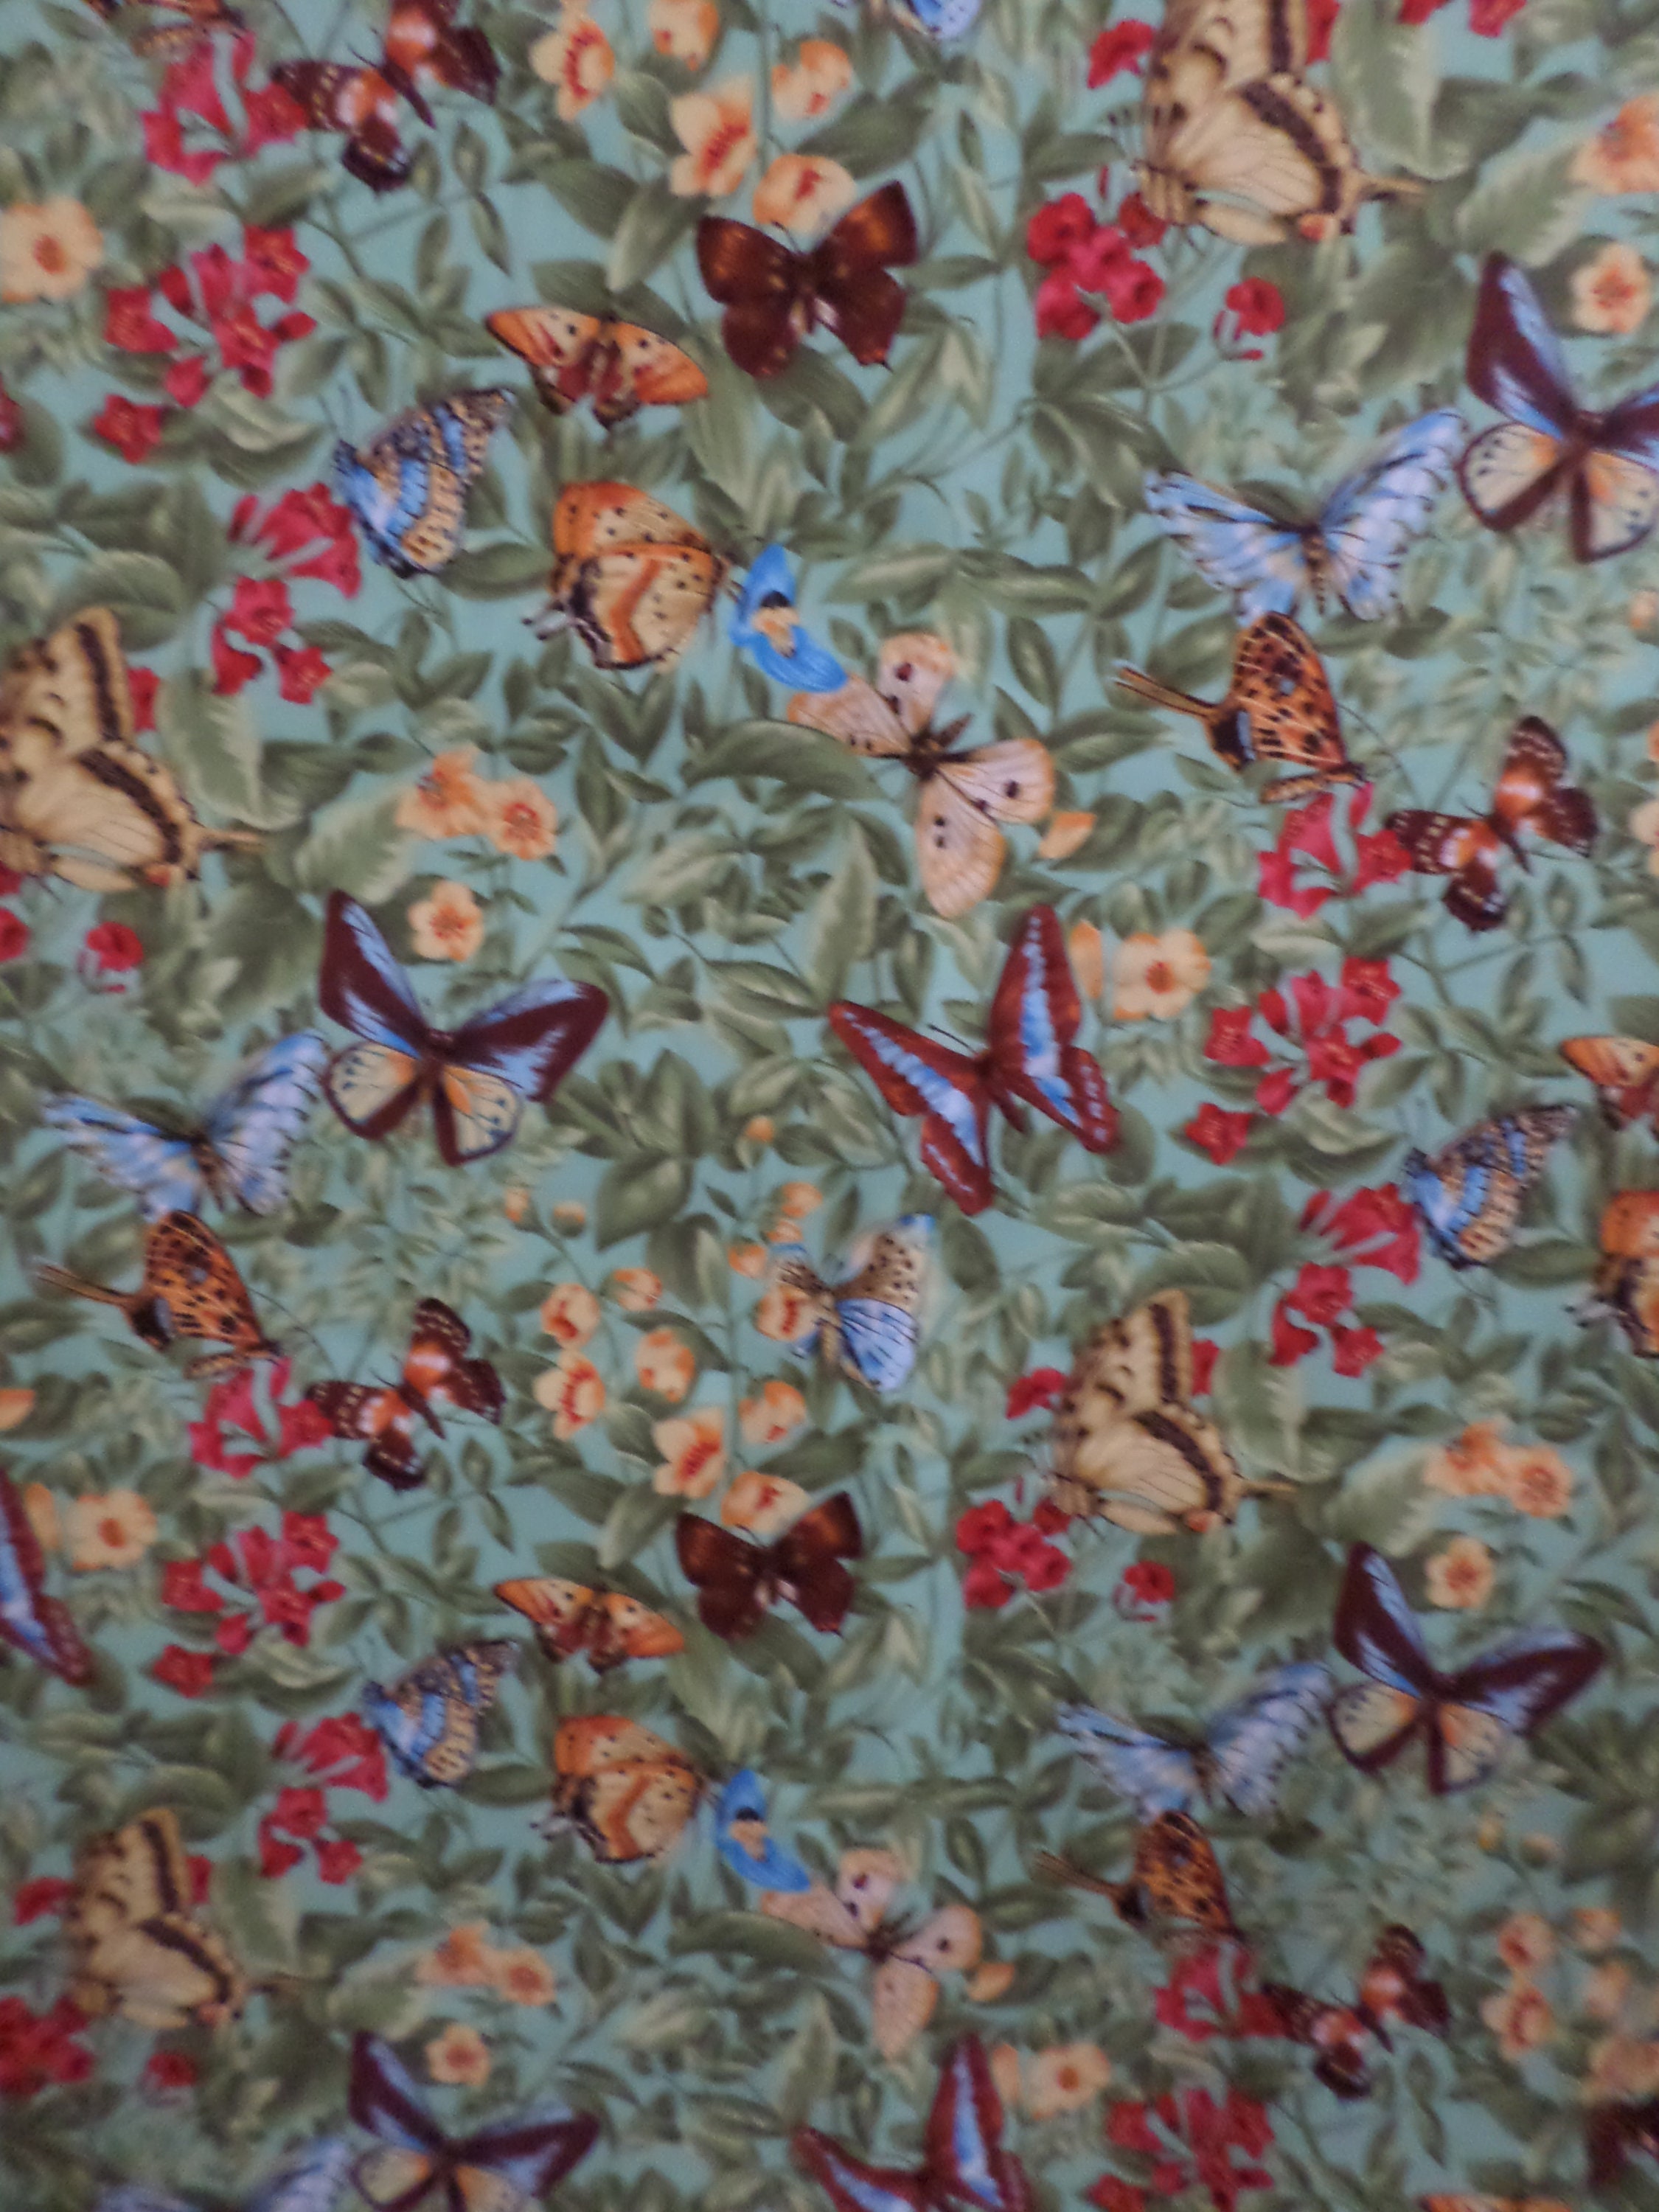 Beautiful Butterfly Fabric from Hancock Fabrics in a green | Etsy